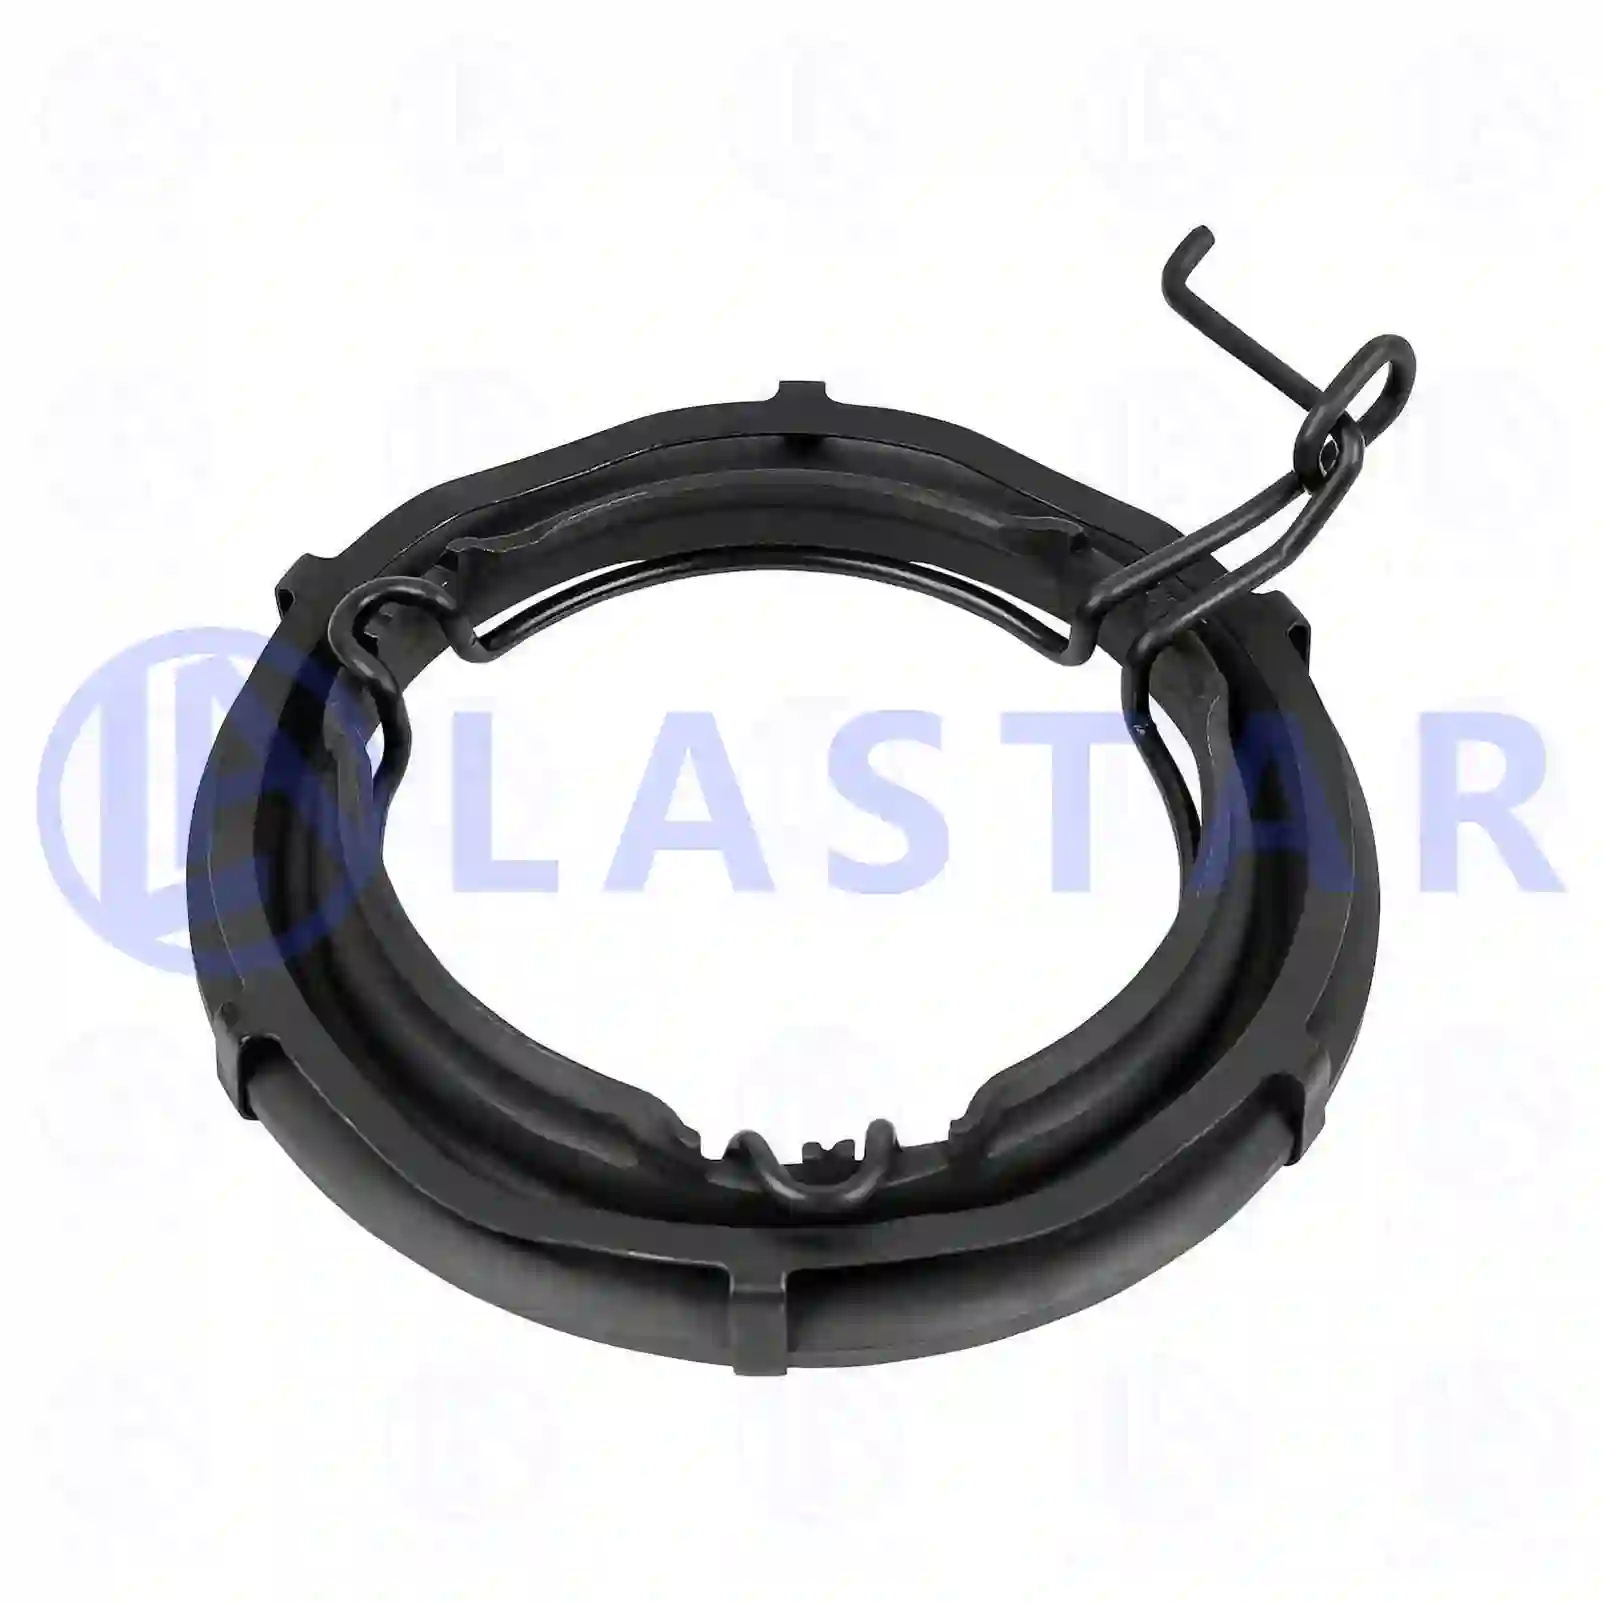 Release ring, 77722401, 500001283, 50001283, 81303006004, 0002520346 ||  77722401 Lastar Spare Part | Truck Spare Parts, Auotomotive Spare Parts Release ring, 77722401, 500001283, 50001283, 81303006004, 0002520346 ||  77722401 Lastar Spare Part | Truck Spare Parts, Auotomotive Spare Parts